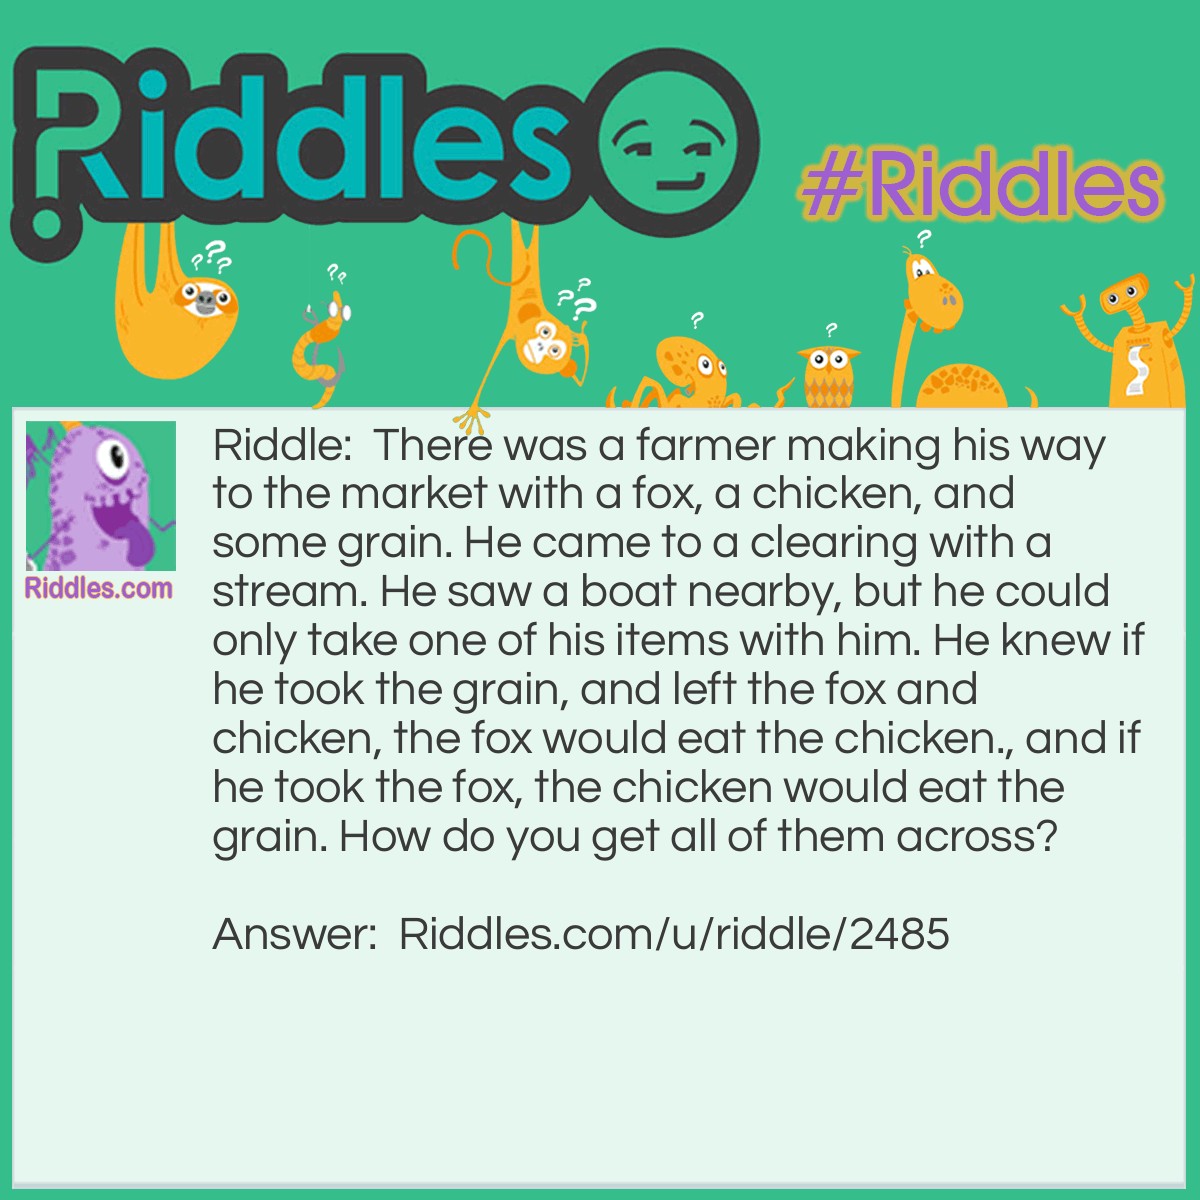 Riddle: There was a farmer making his way to the market with a fox, a chicken, and some grain. He came to a clearing with a stream. He saw a boat nearby, but he could only take one of his items with him. He knew if he took the grain, and left the fox and chicken, the fox would eat the chicken., and if he took the fox, the chicken would eat the grain. How do you get all of them across? Answer: You take the chicken across, and then go back for the fox. While you are dropping off the fox, take the chicken back, and then get the grain, and take it across. Then go back and get the chicken. Share this with your friends!